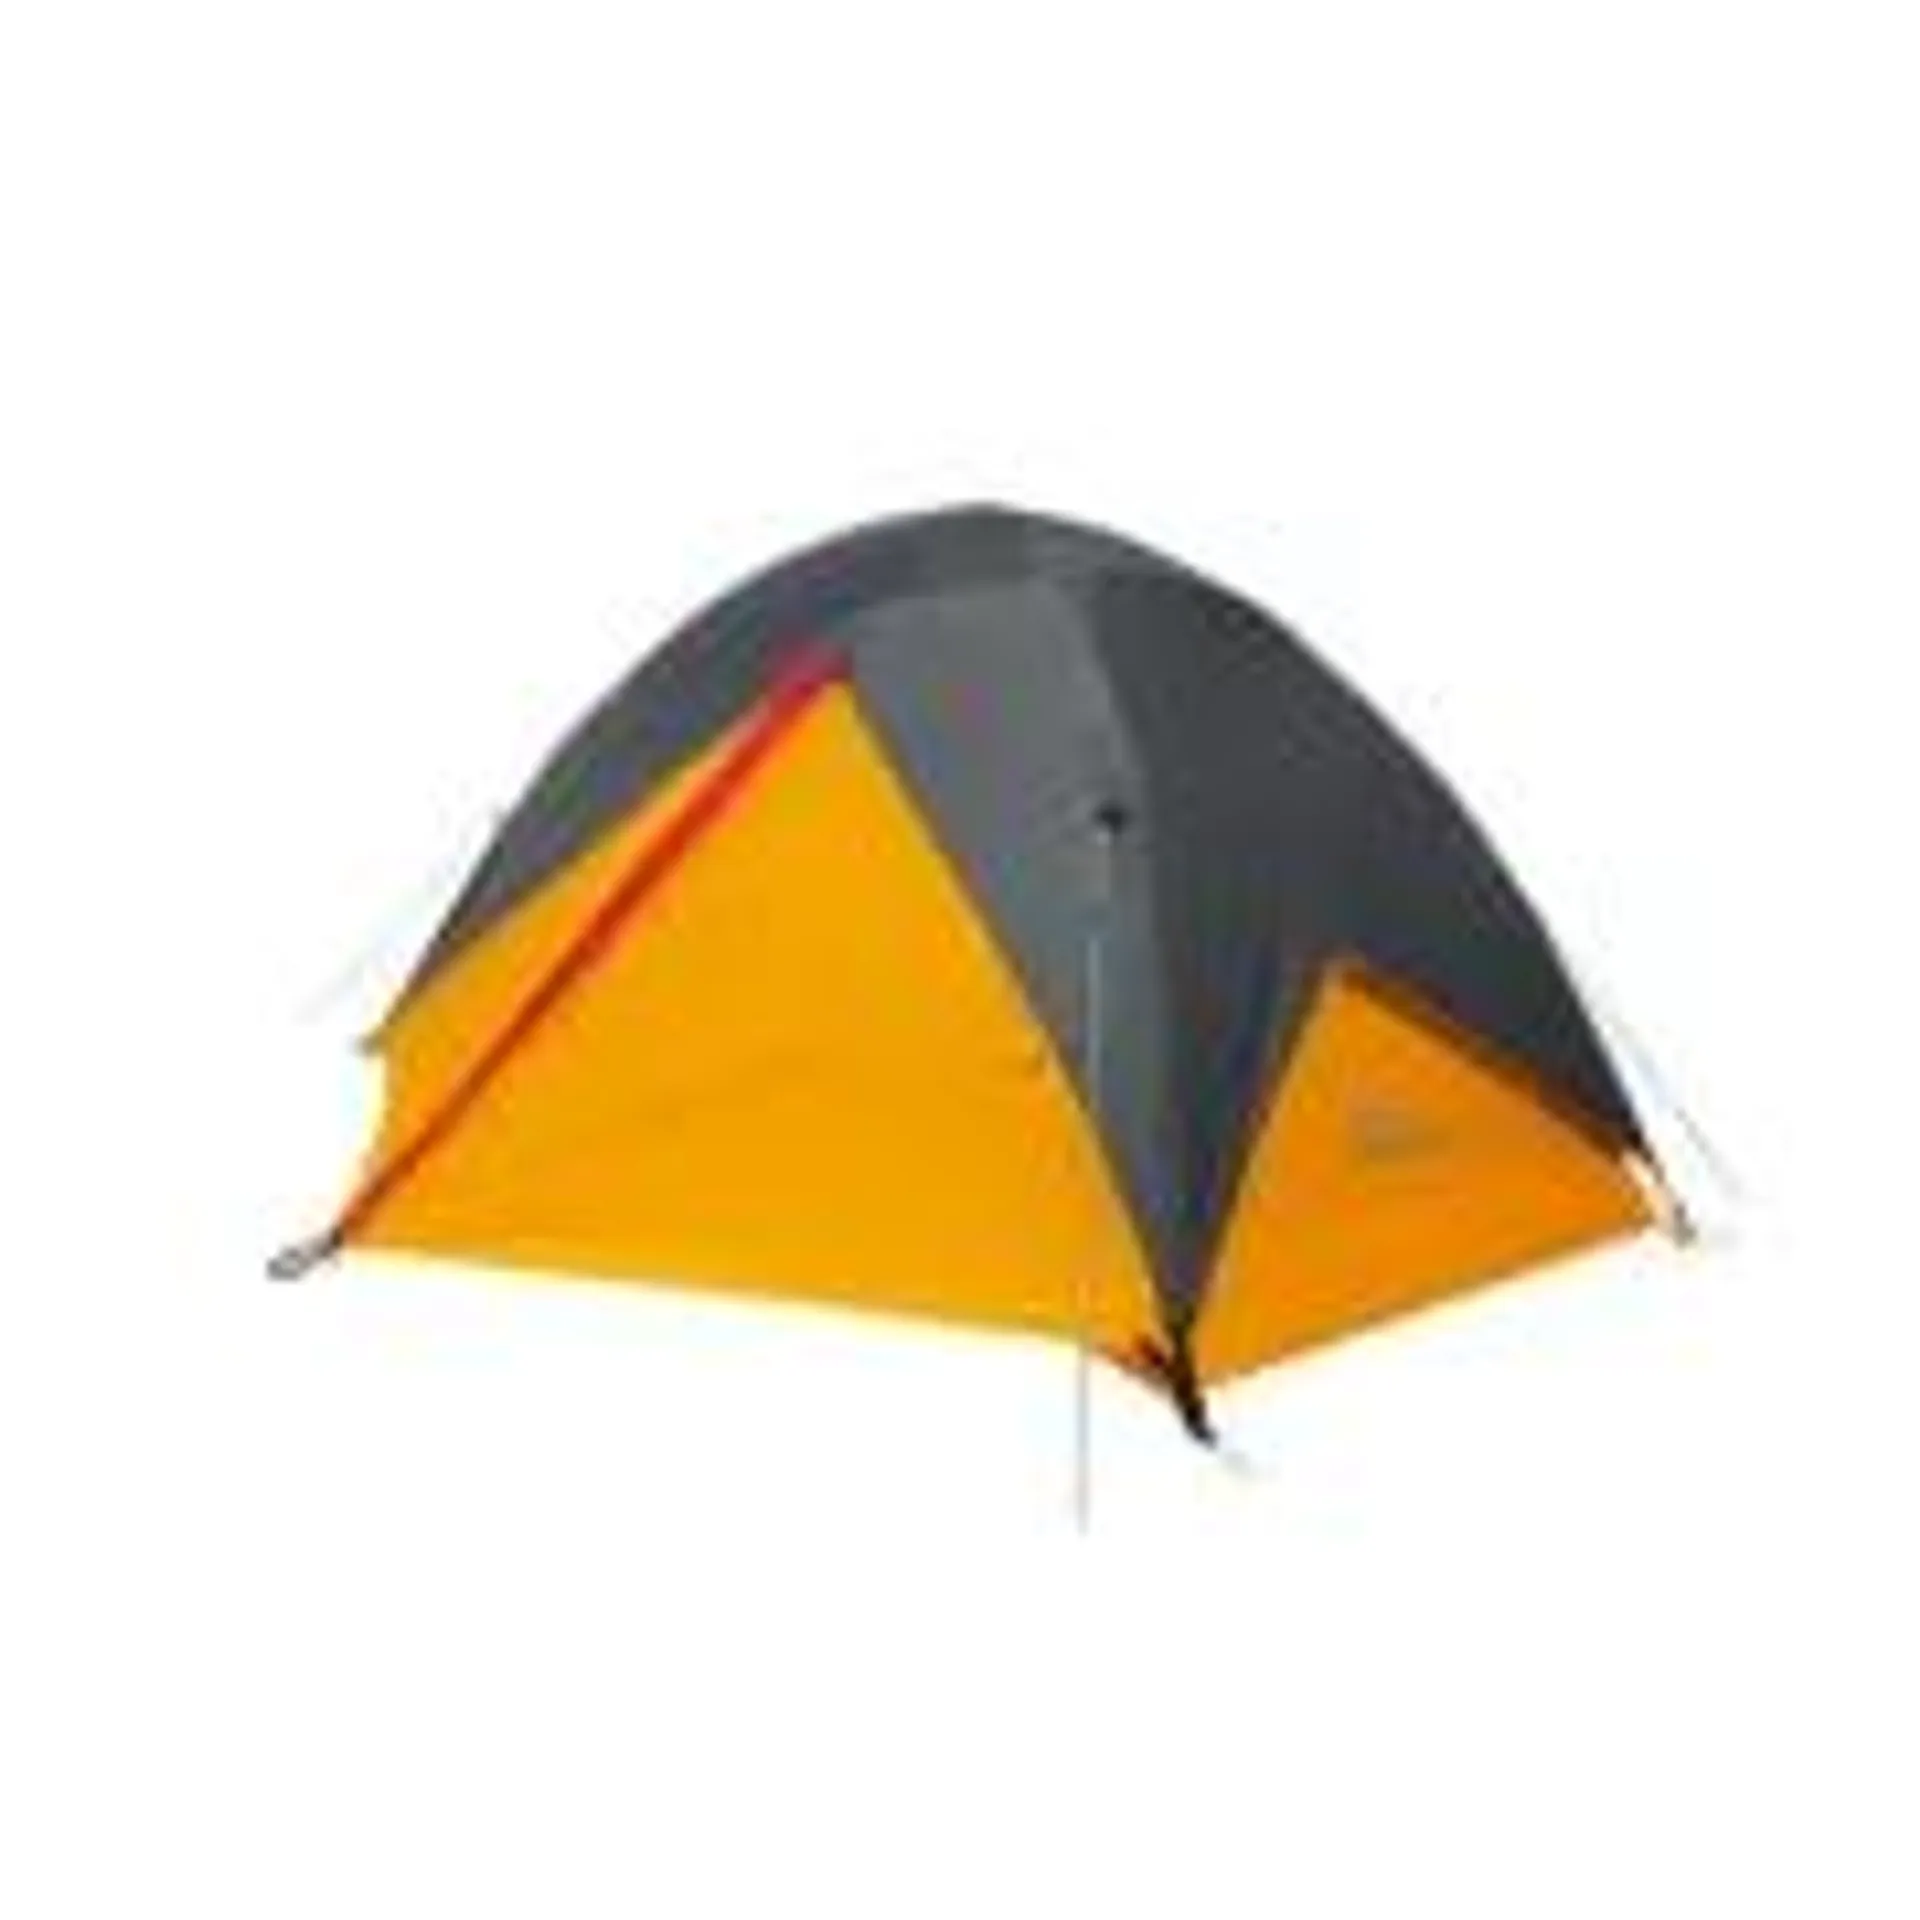 PEAK1™ 2-Person Backpacking Tent​